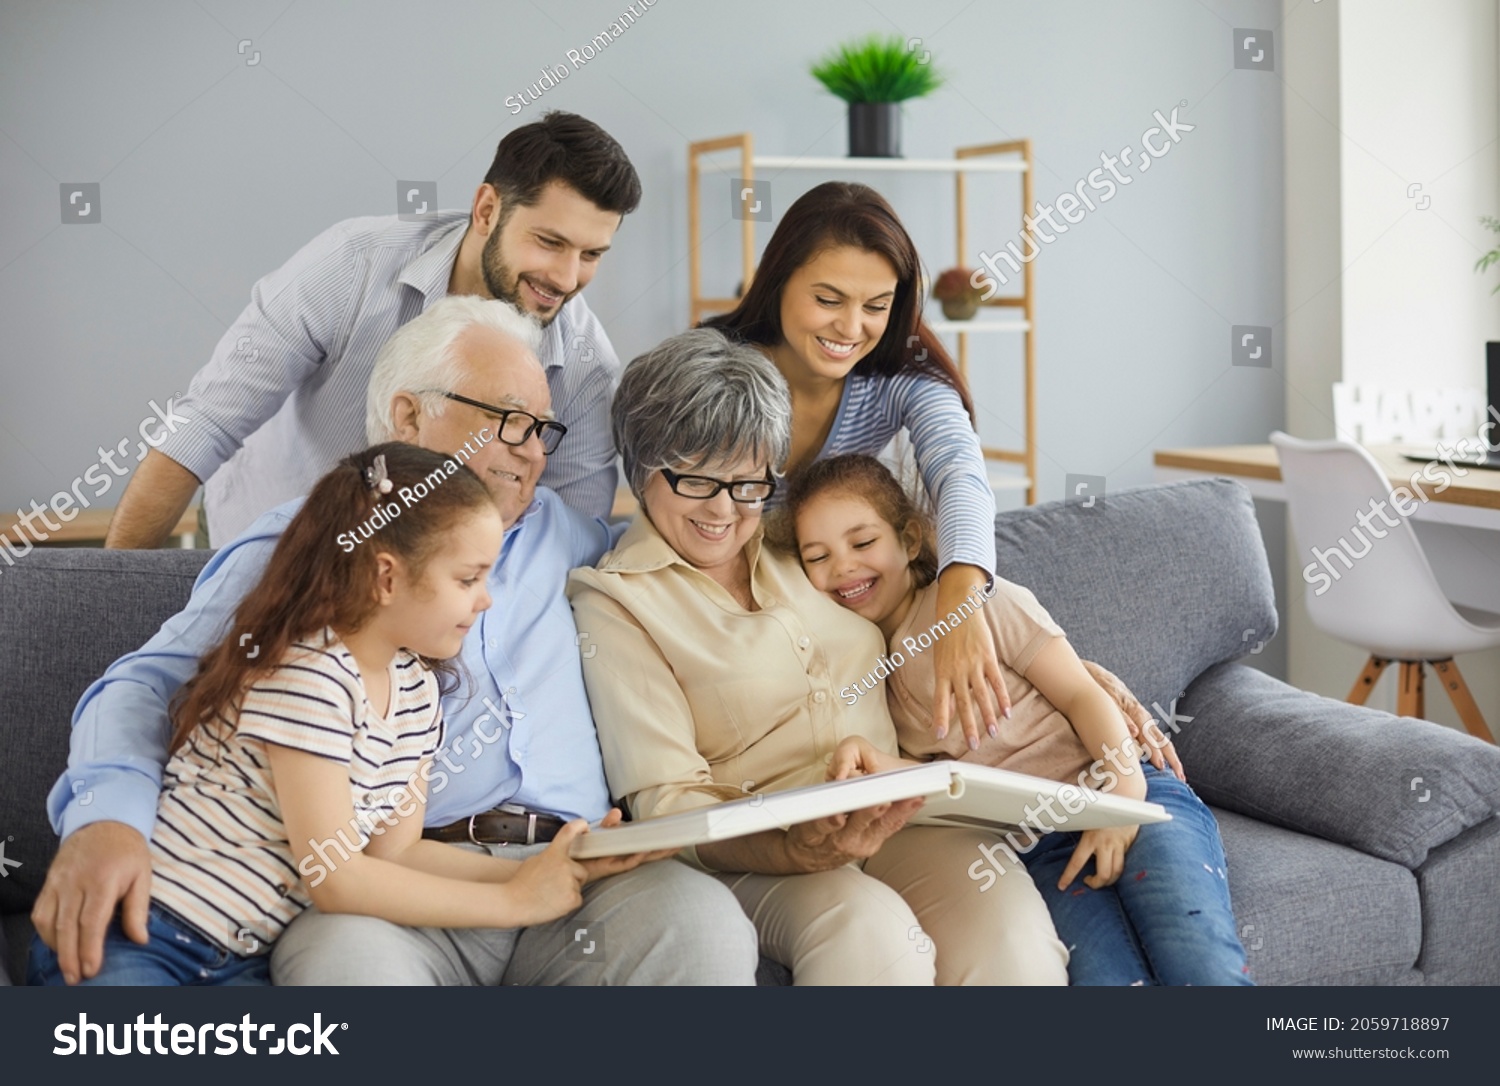 Happy big family grandparents with twin granddaughters and their parents browse the family photo album and share happy memories. Family gathered together in the living room. Family connection concept. #2059718897